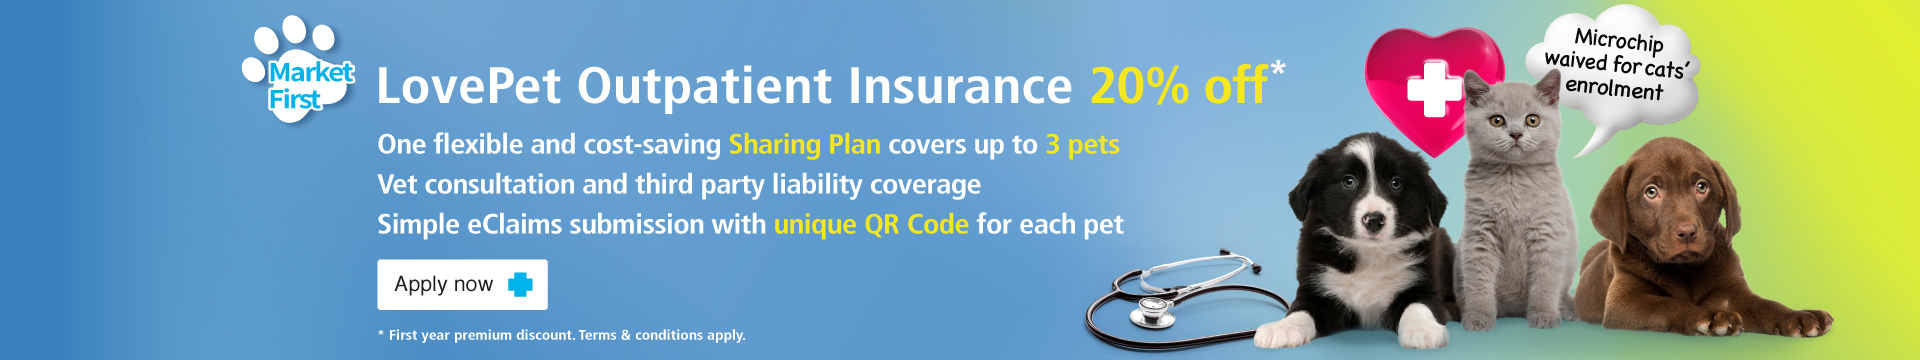 LovePet Outpatient Insurance